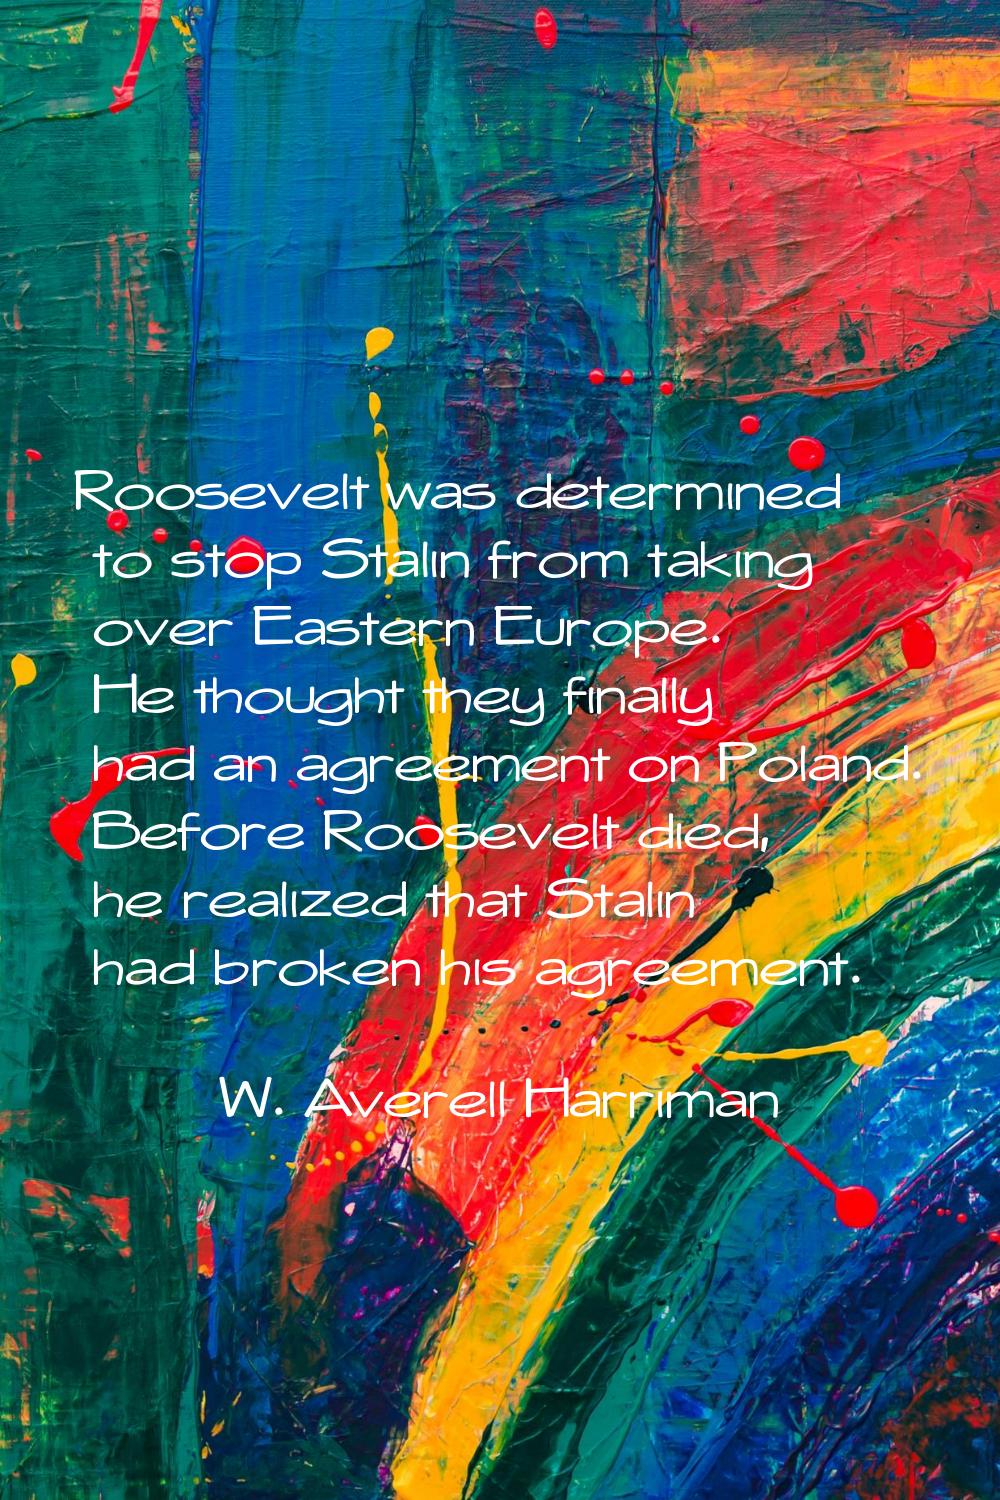 Roosevelt was determined to stop Stalin from taking over Eastern Europe. He thought they finally ha